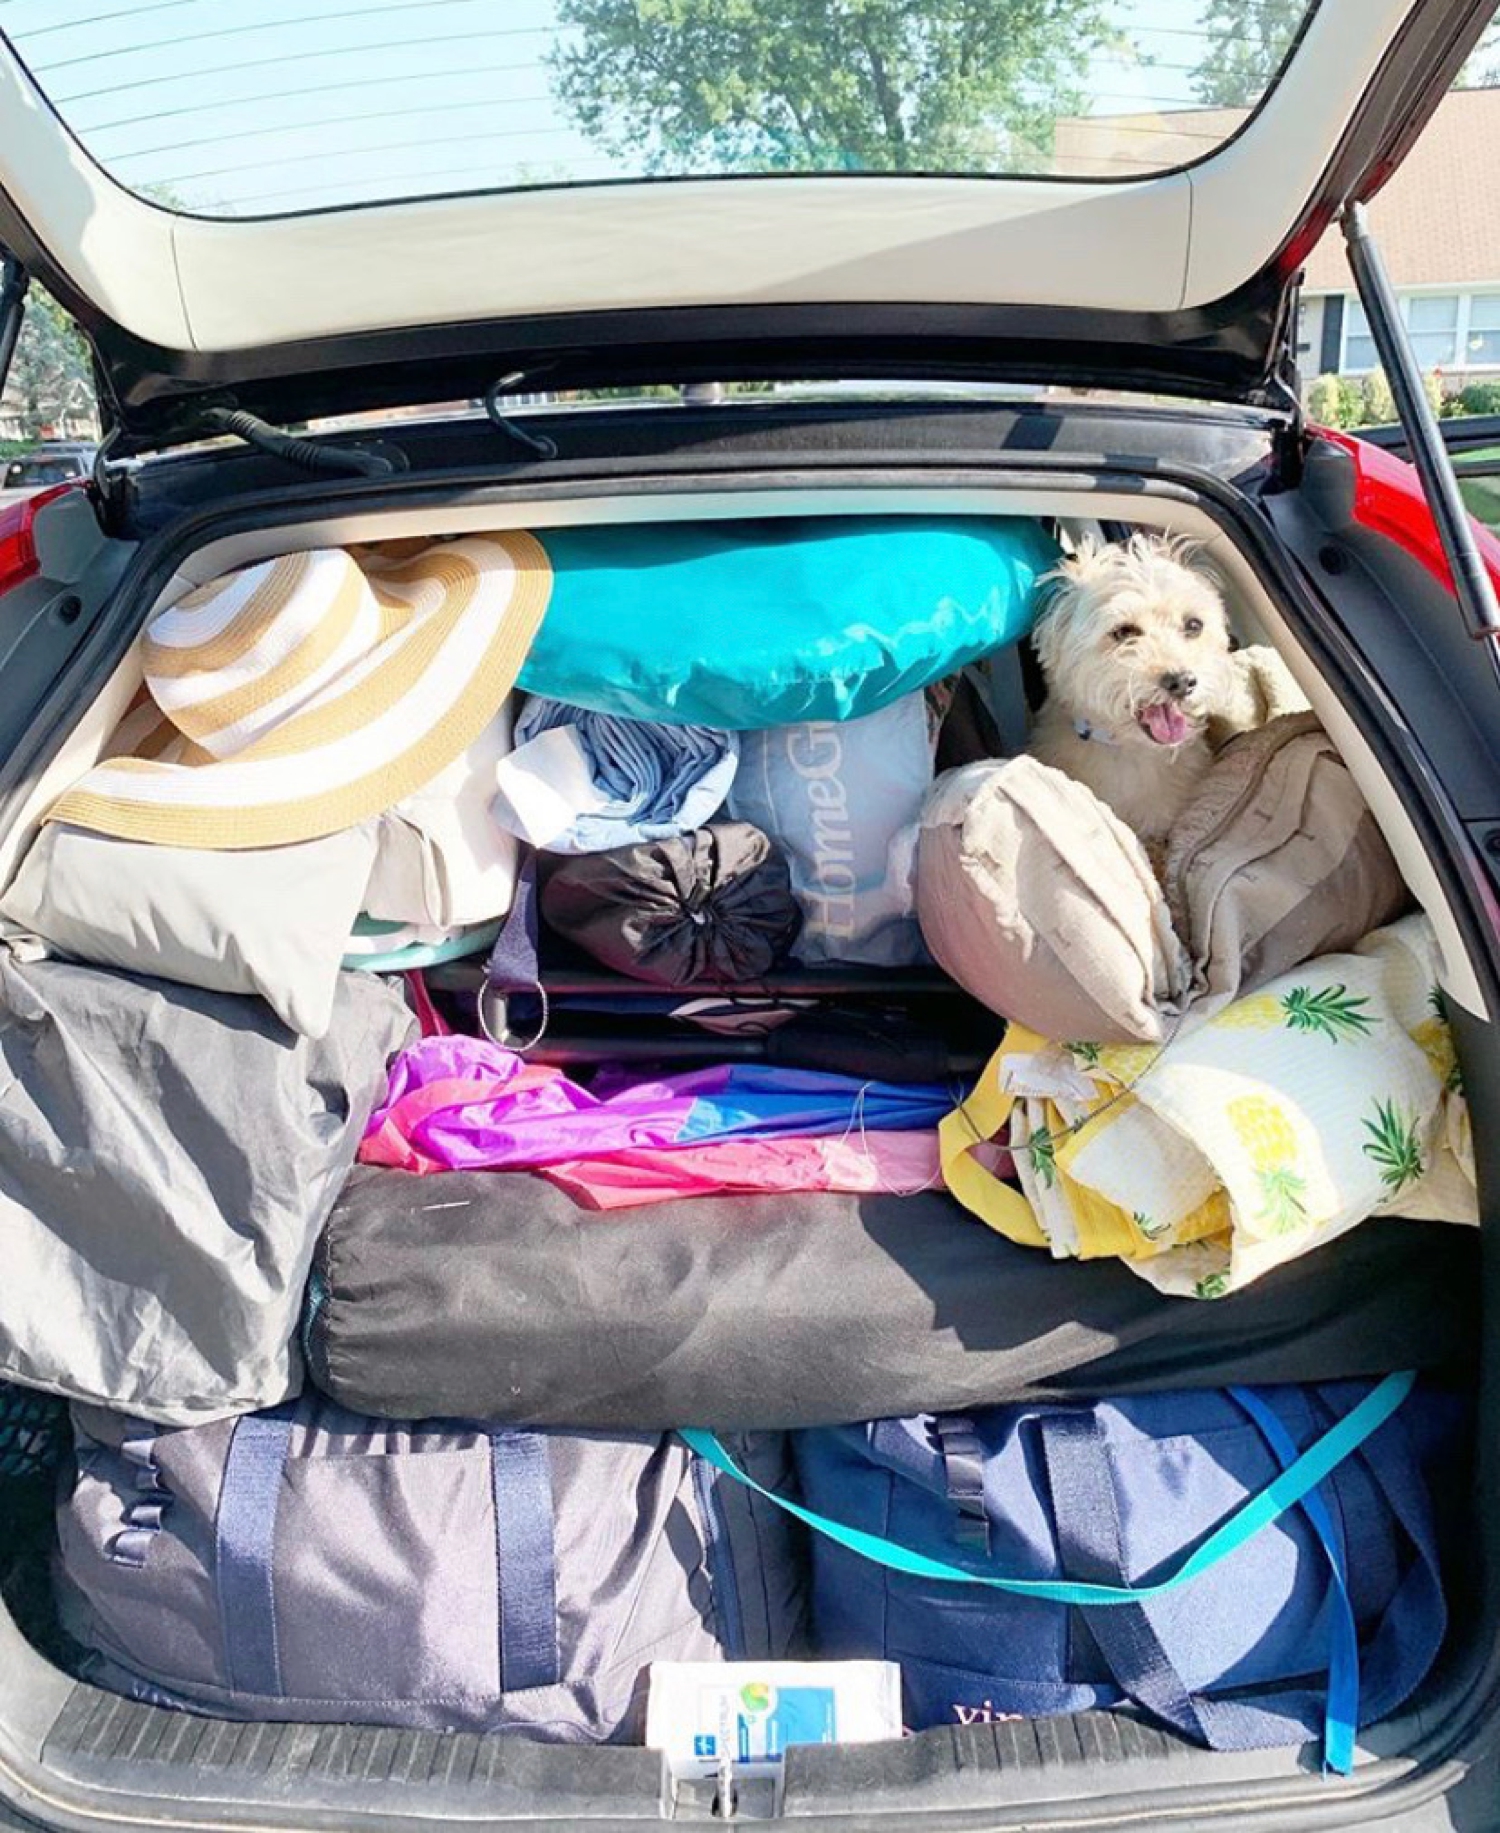  We somehow fit it all with the pup!  